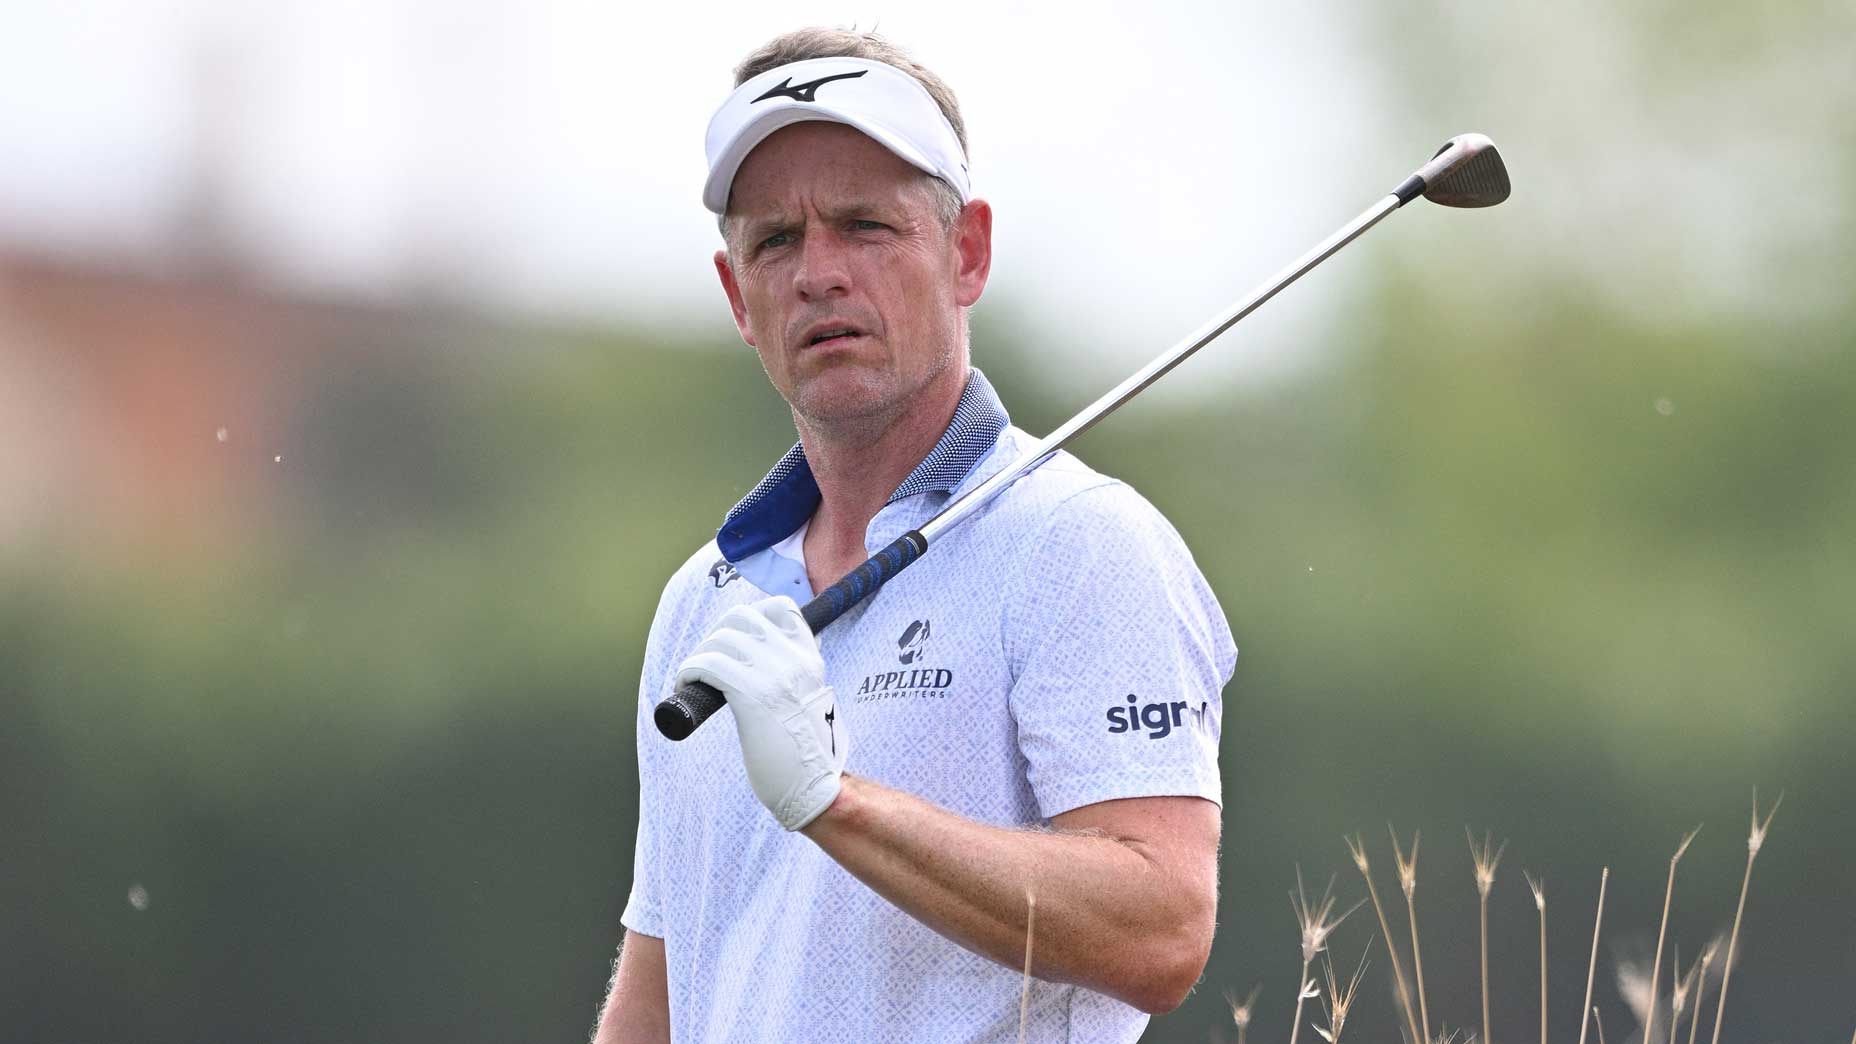 Luke Donald stares after poor shot at 2022 Italian Open